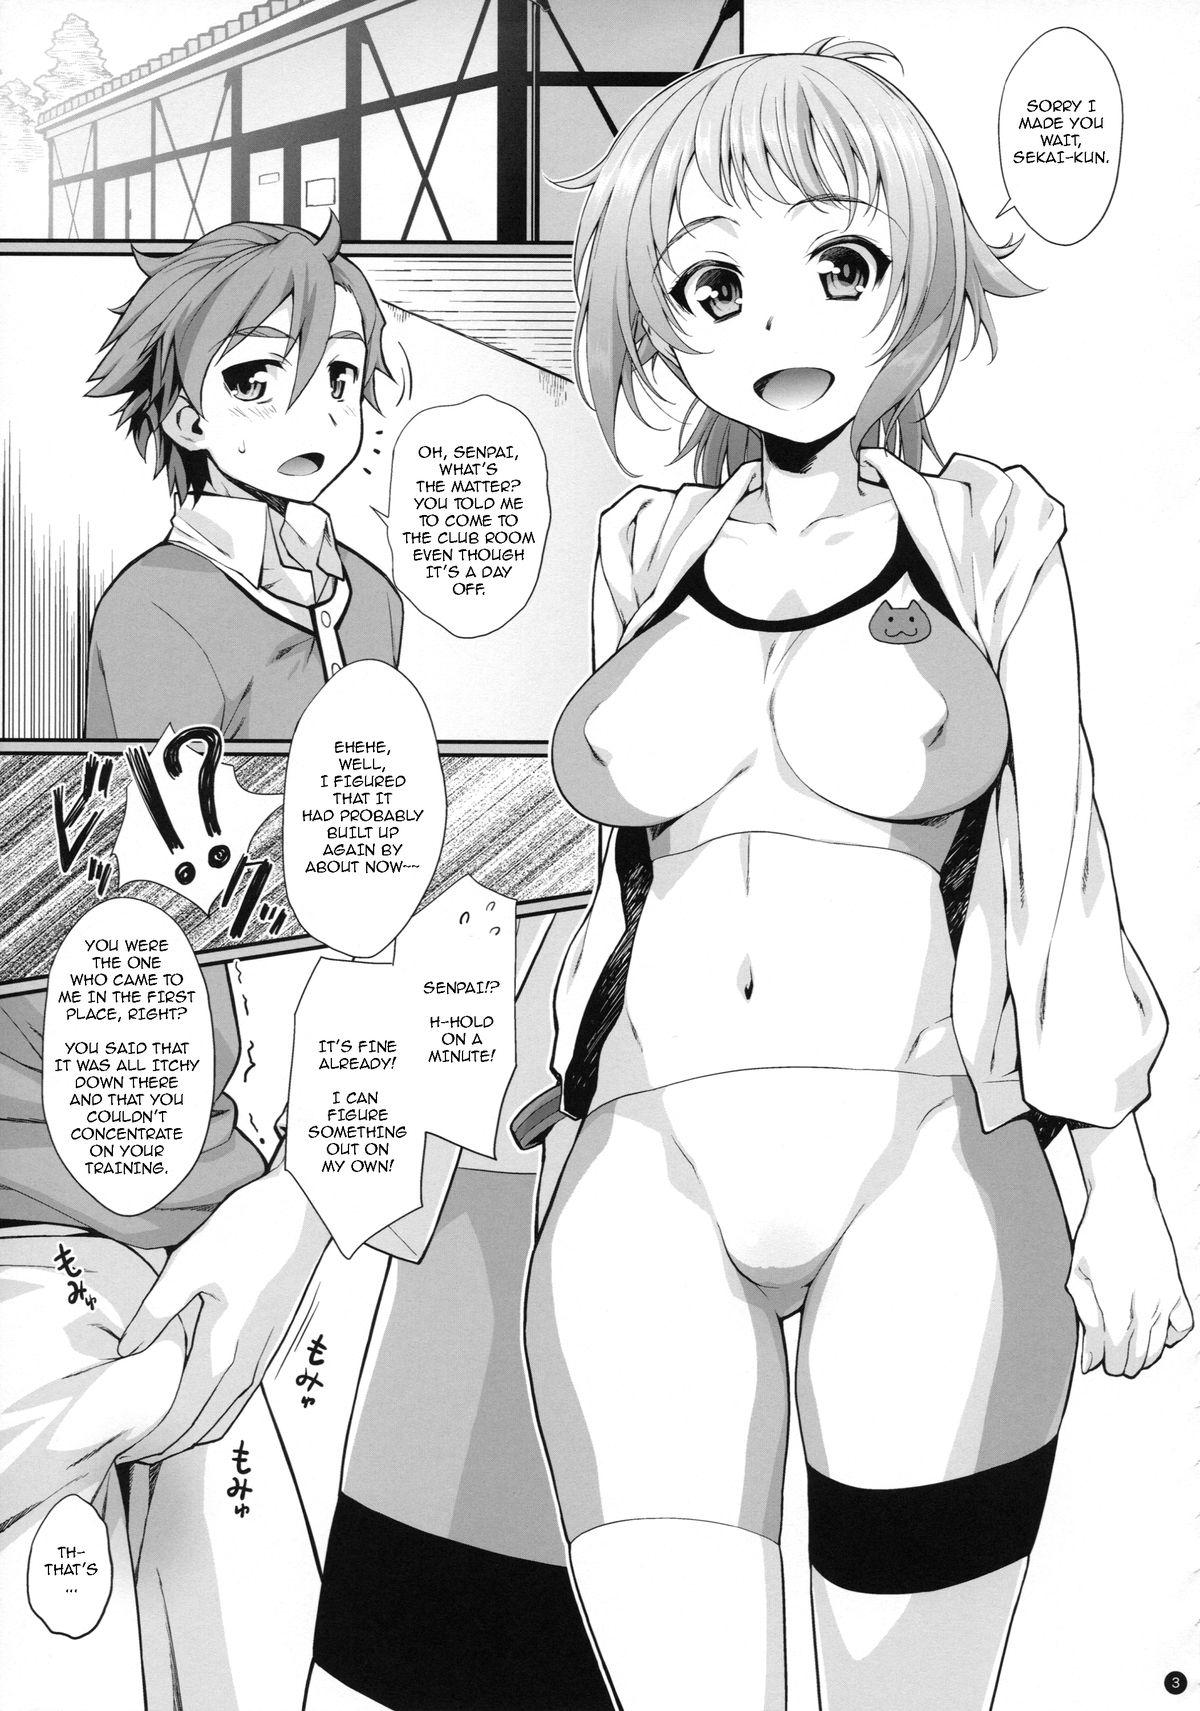 Celebrity Porn TRY ESCALATION - Gundam build fighters try Outdoor - Page 5